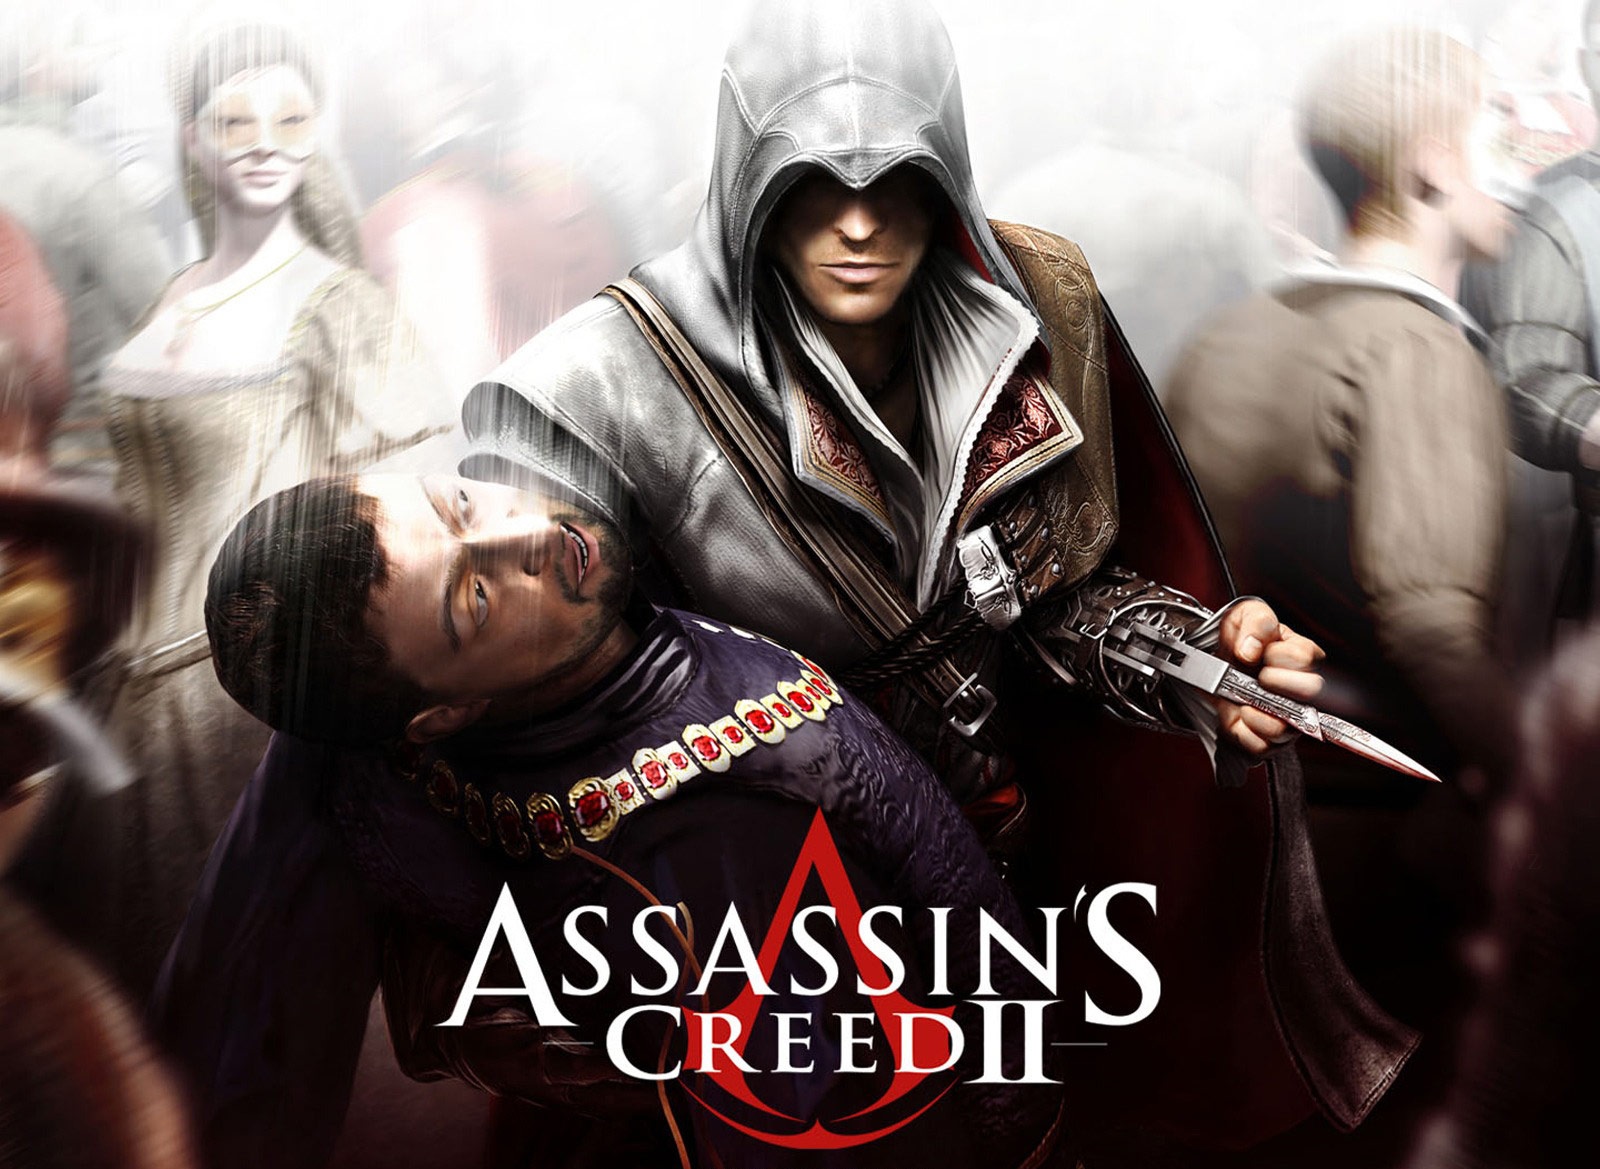 video game, assassin's creed ii, assassin's creed